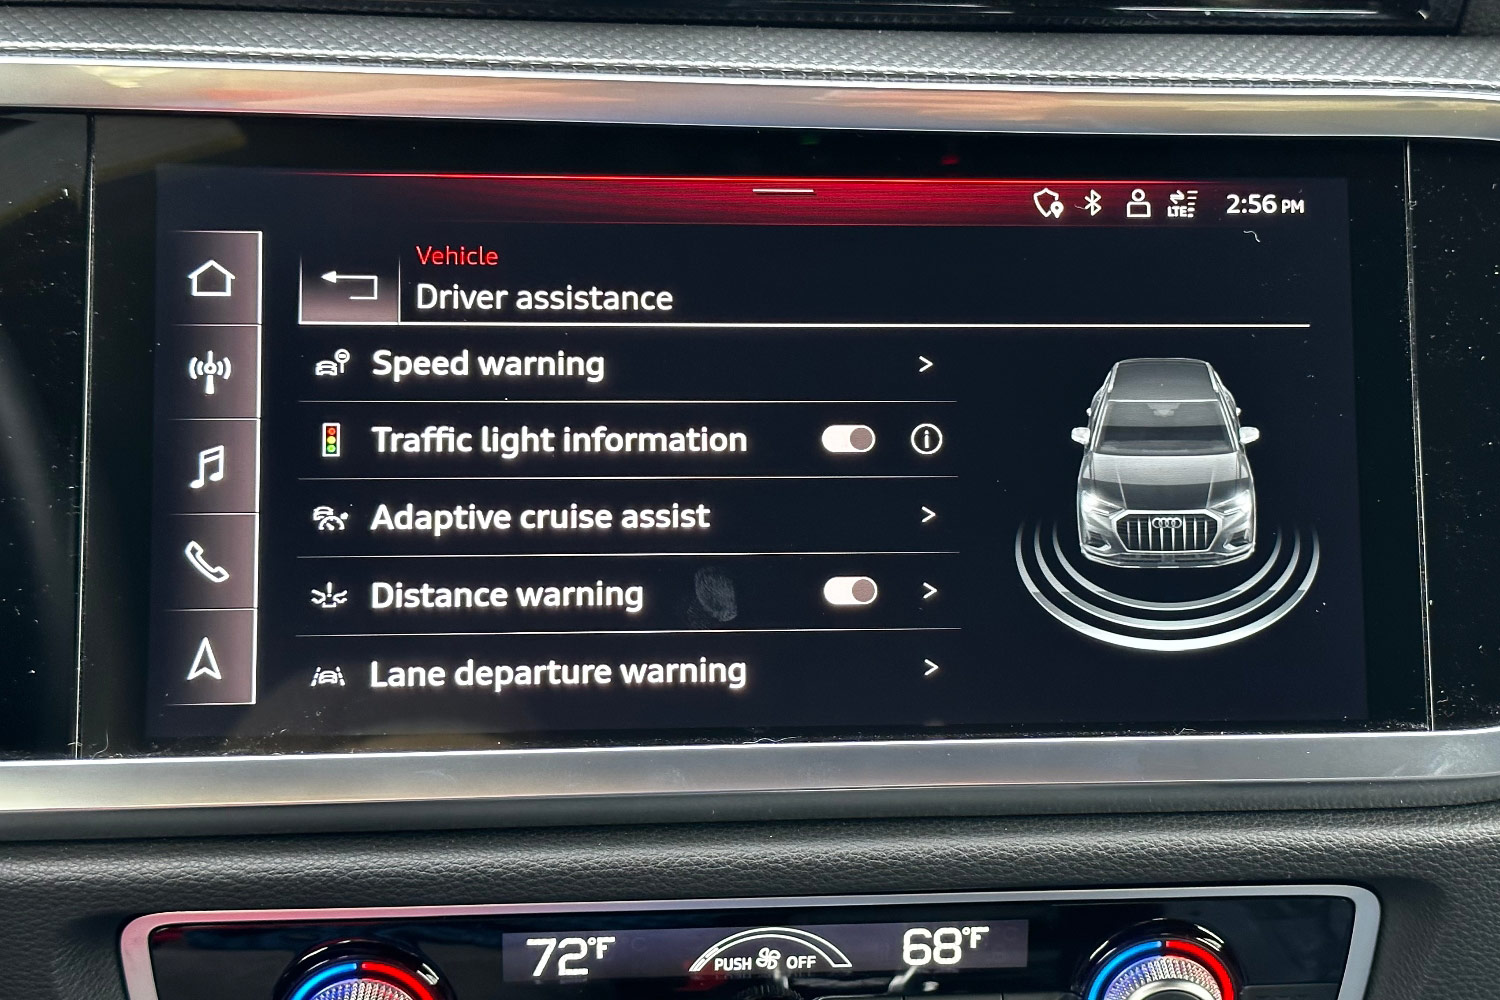 Car controls on the infotainment screen in an Audi Q3.